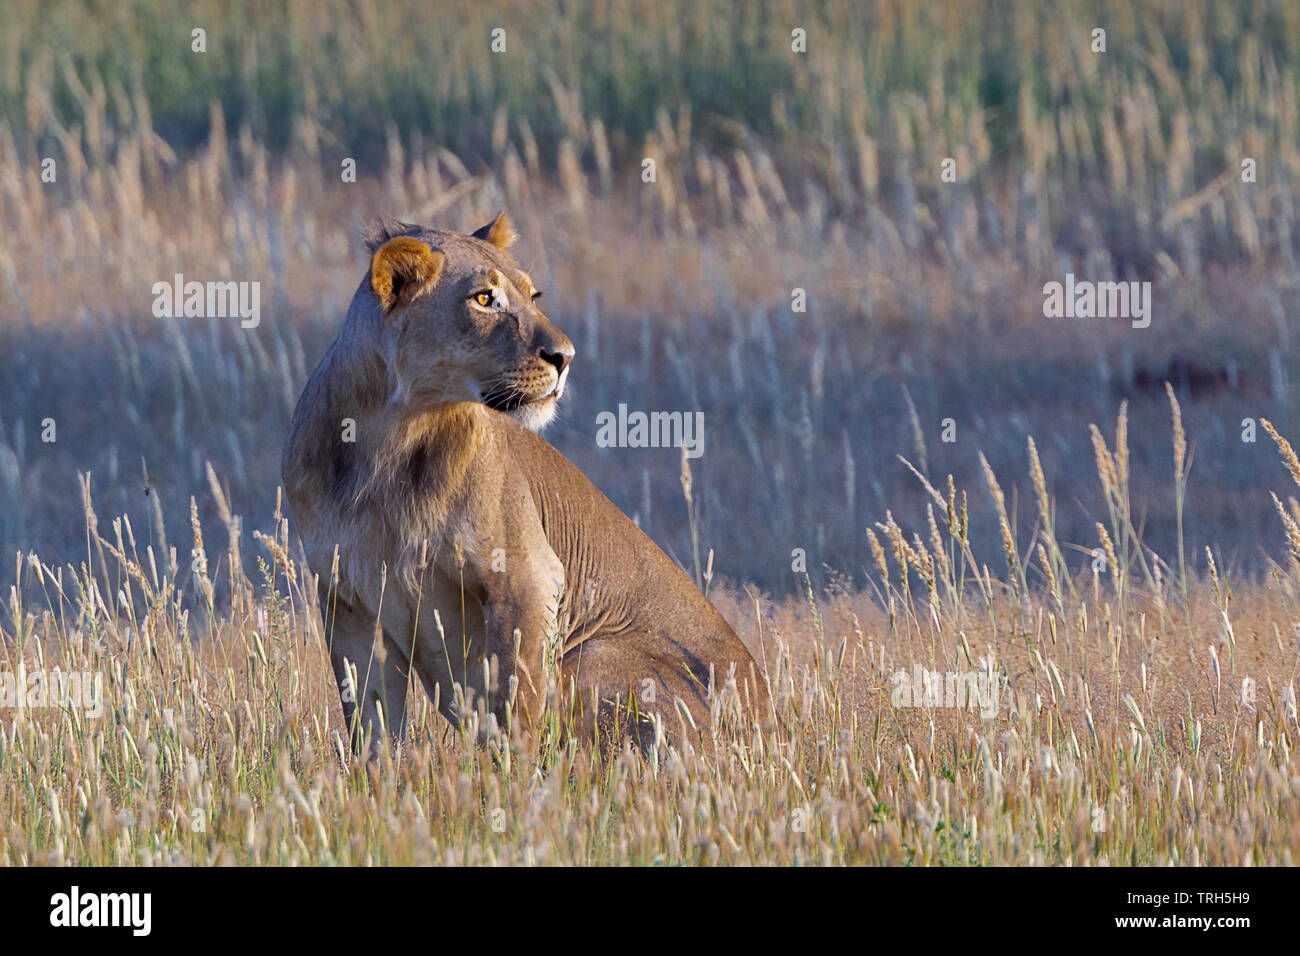 A young male lion alert and on the hunt in a dry riverbed, Kgalagadi Transfrontier Park, Northern Cape Province South Africa Stock Photo